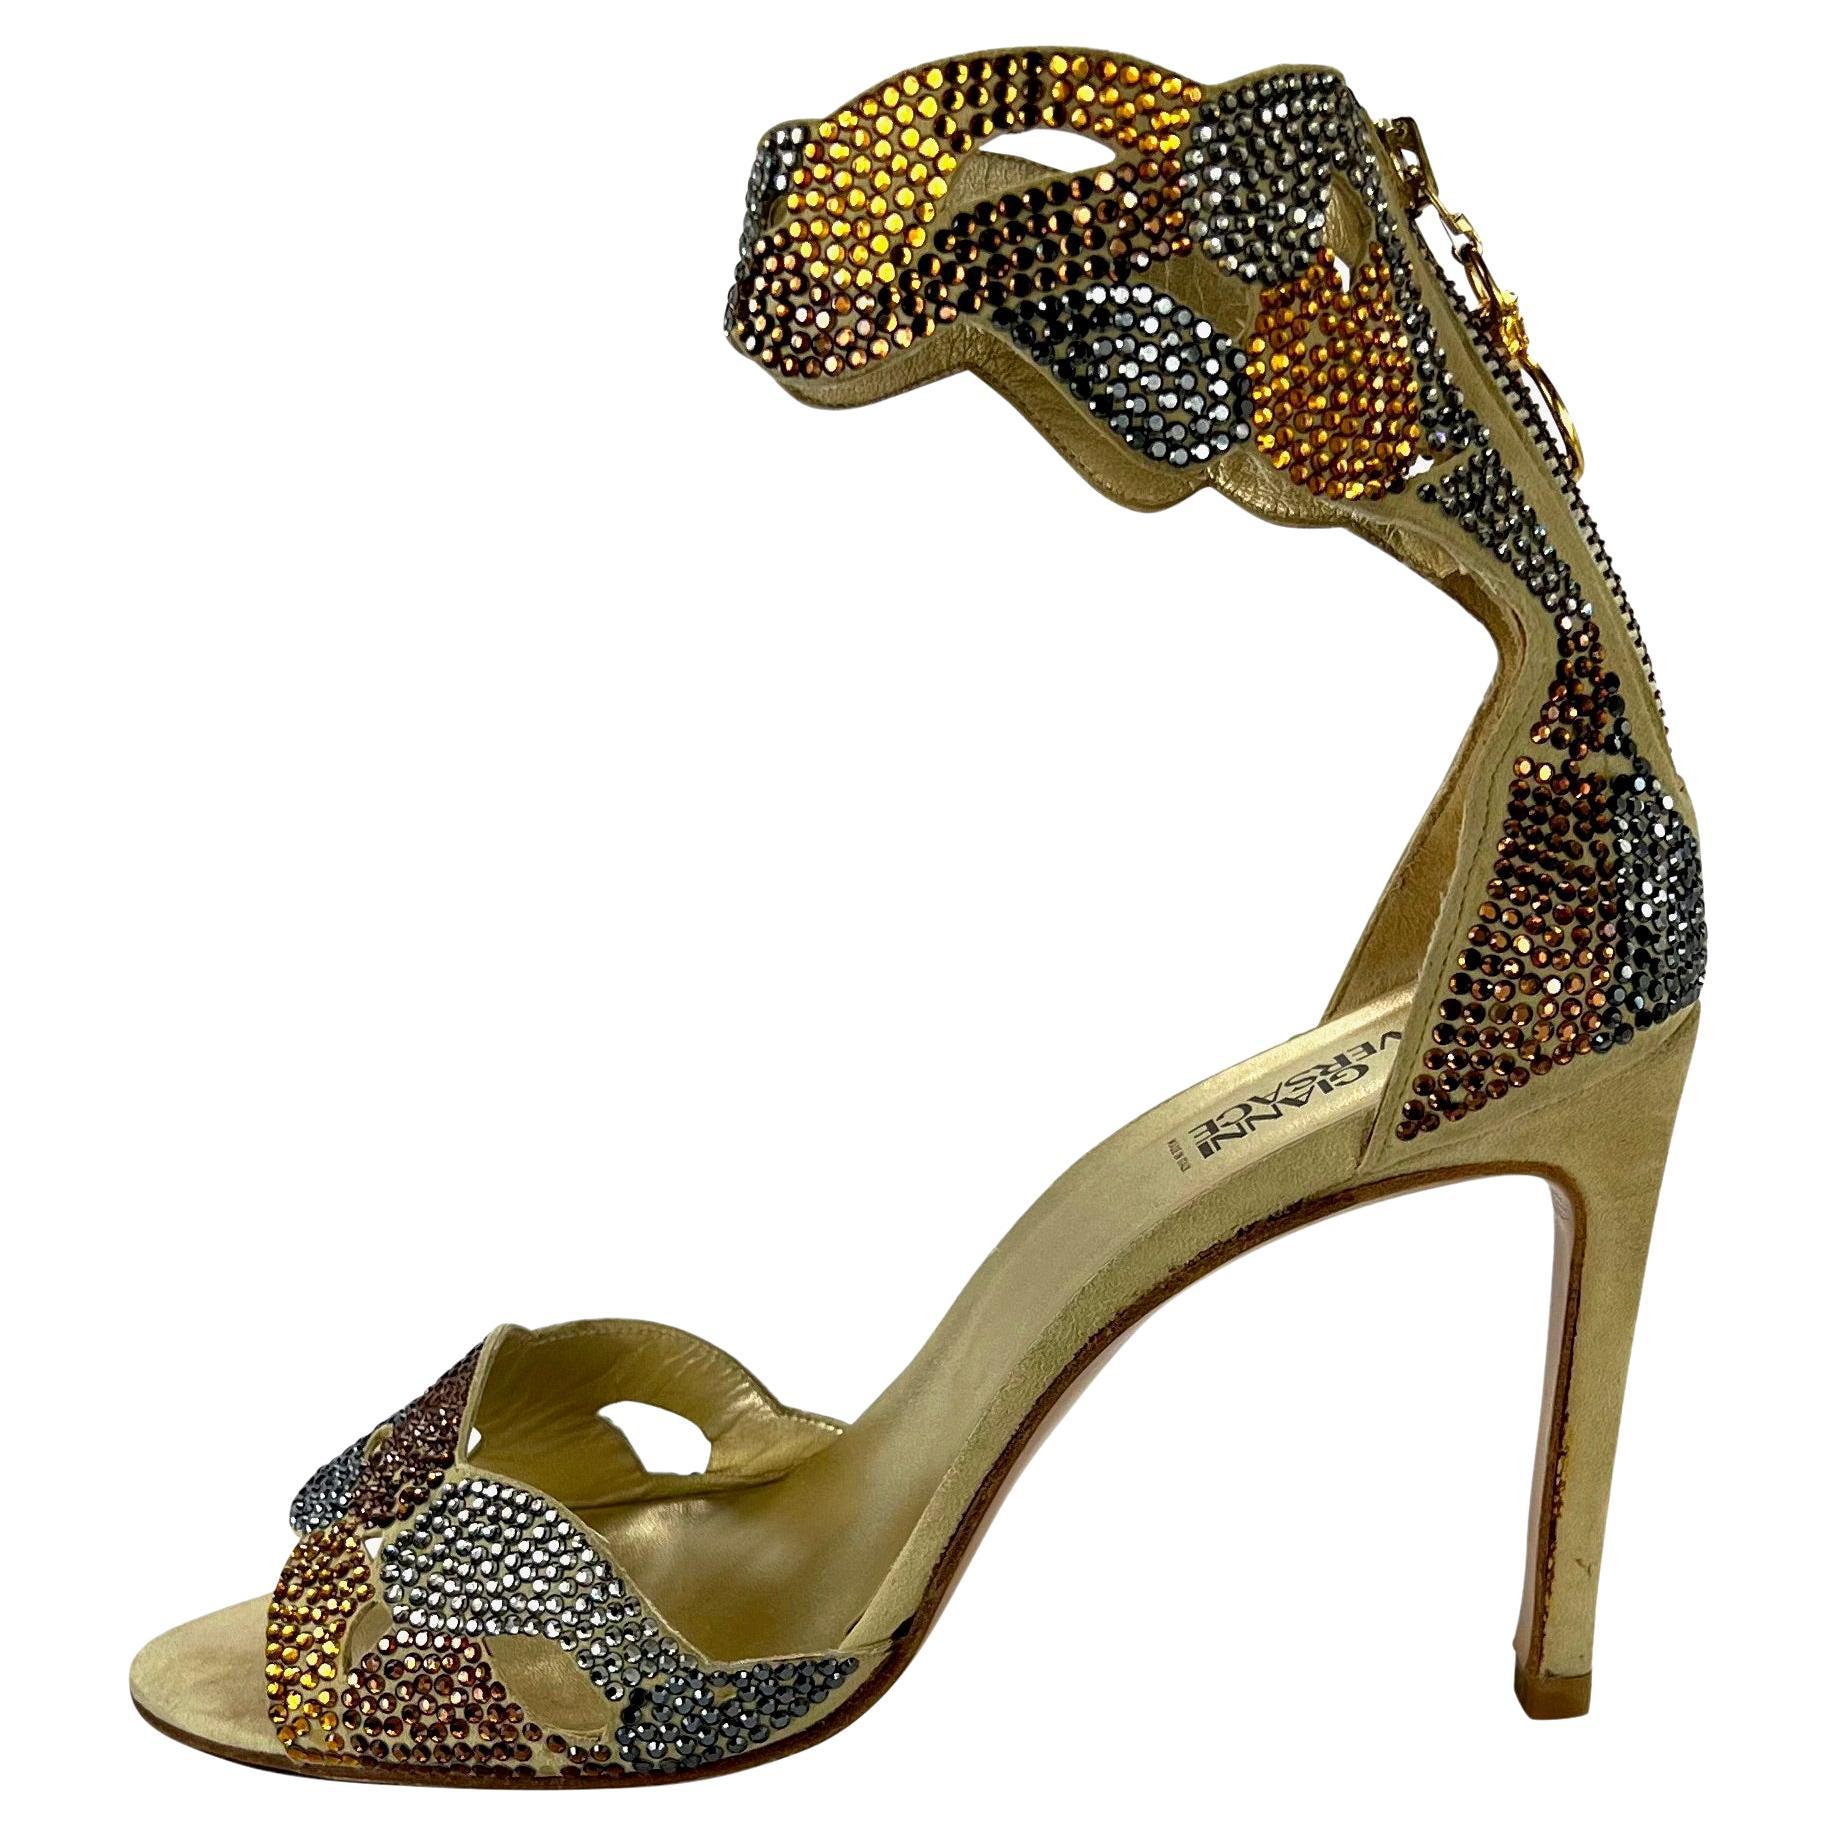 S/S 2000 Gianni Versace by Donatella Versace Crystal Pump Size 39 For Sale